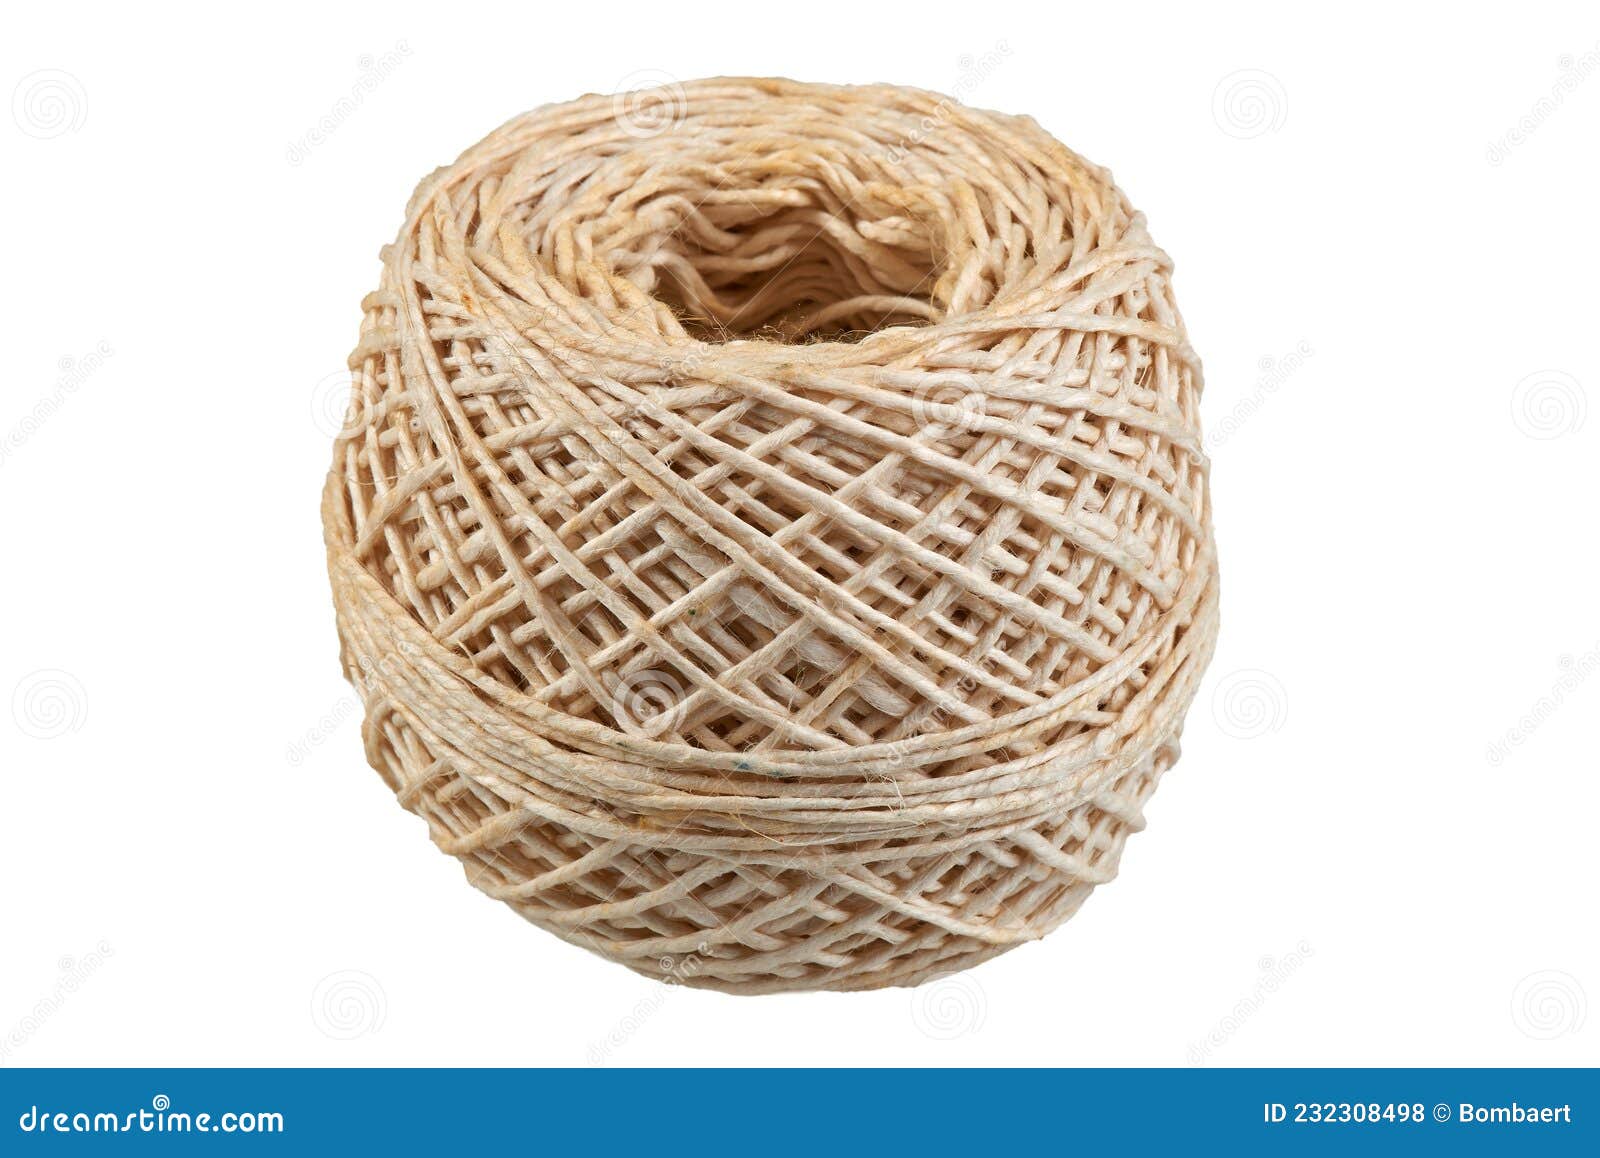 Packing Rope Isolated on White Stock Photo - Image of coil